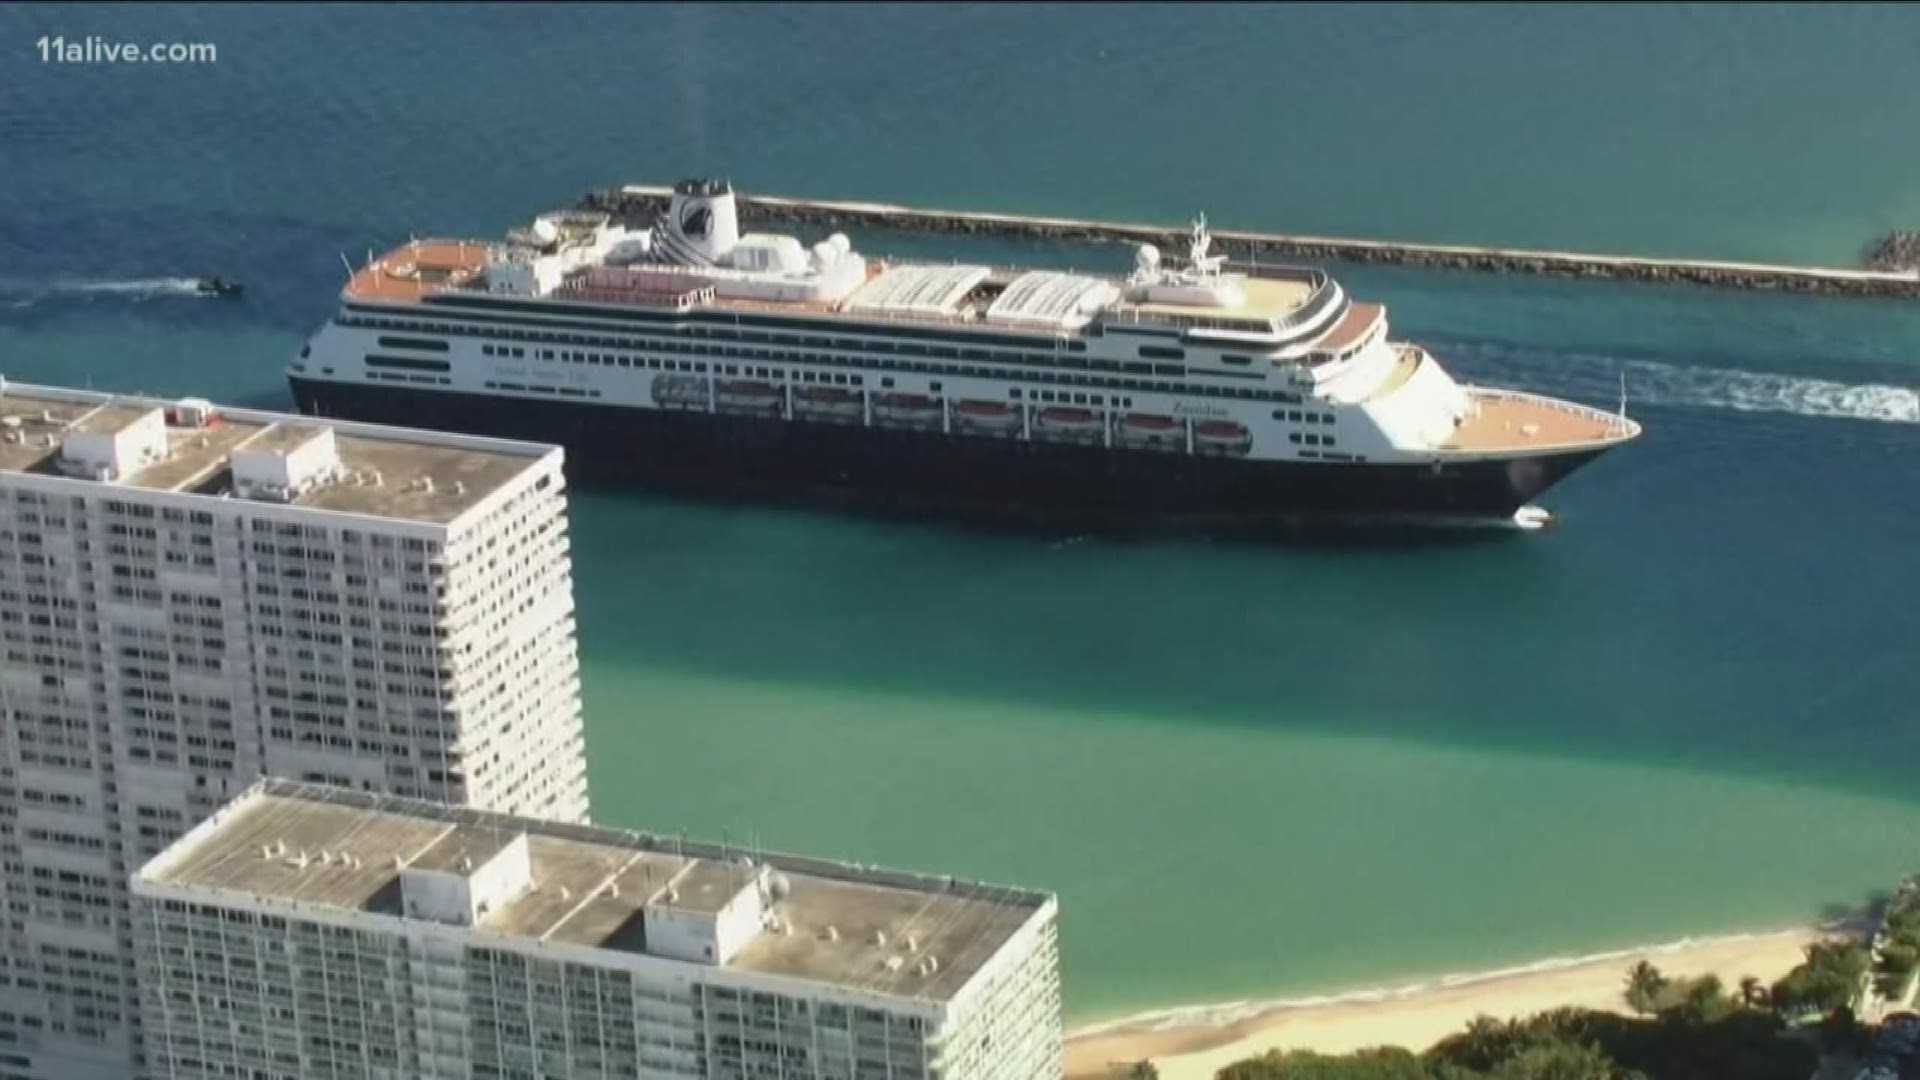 Several people were taken to a hospital in Florida after the cruise ship docked.